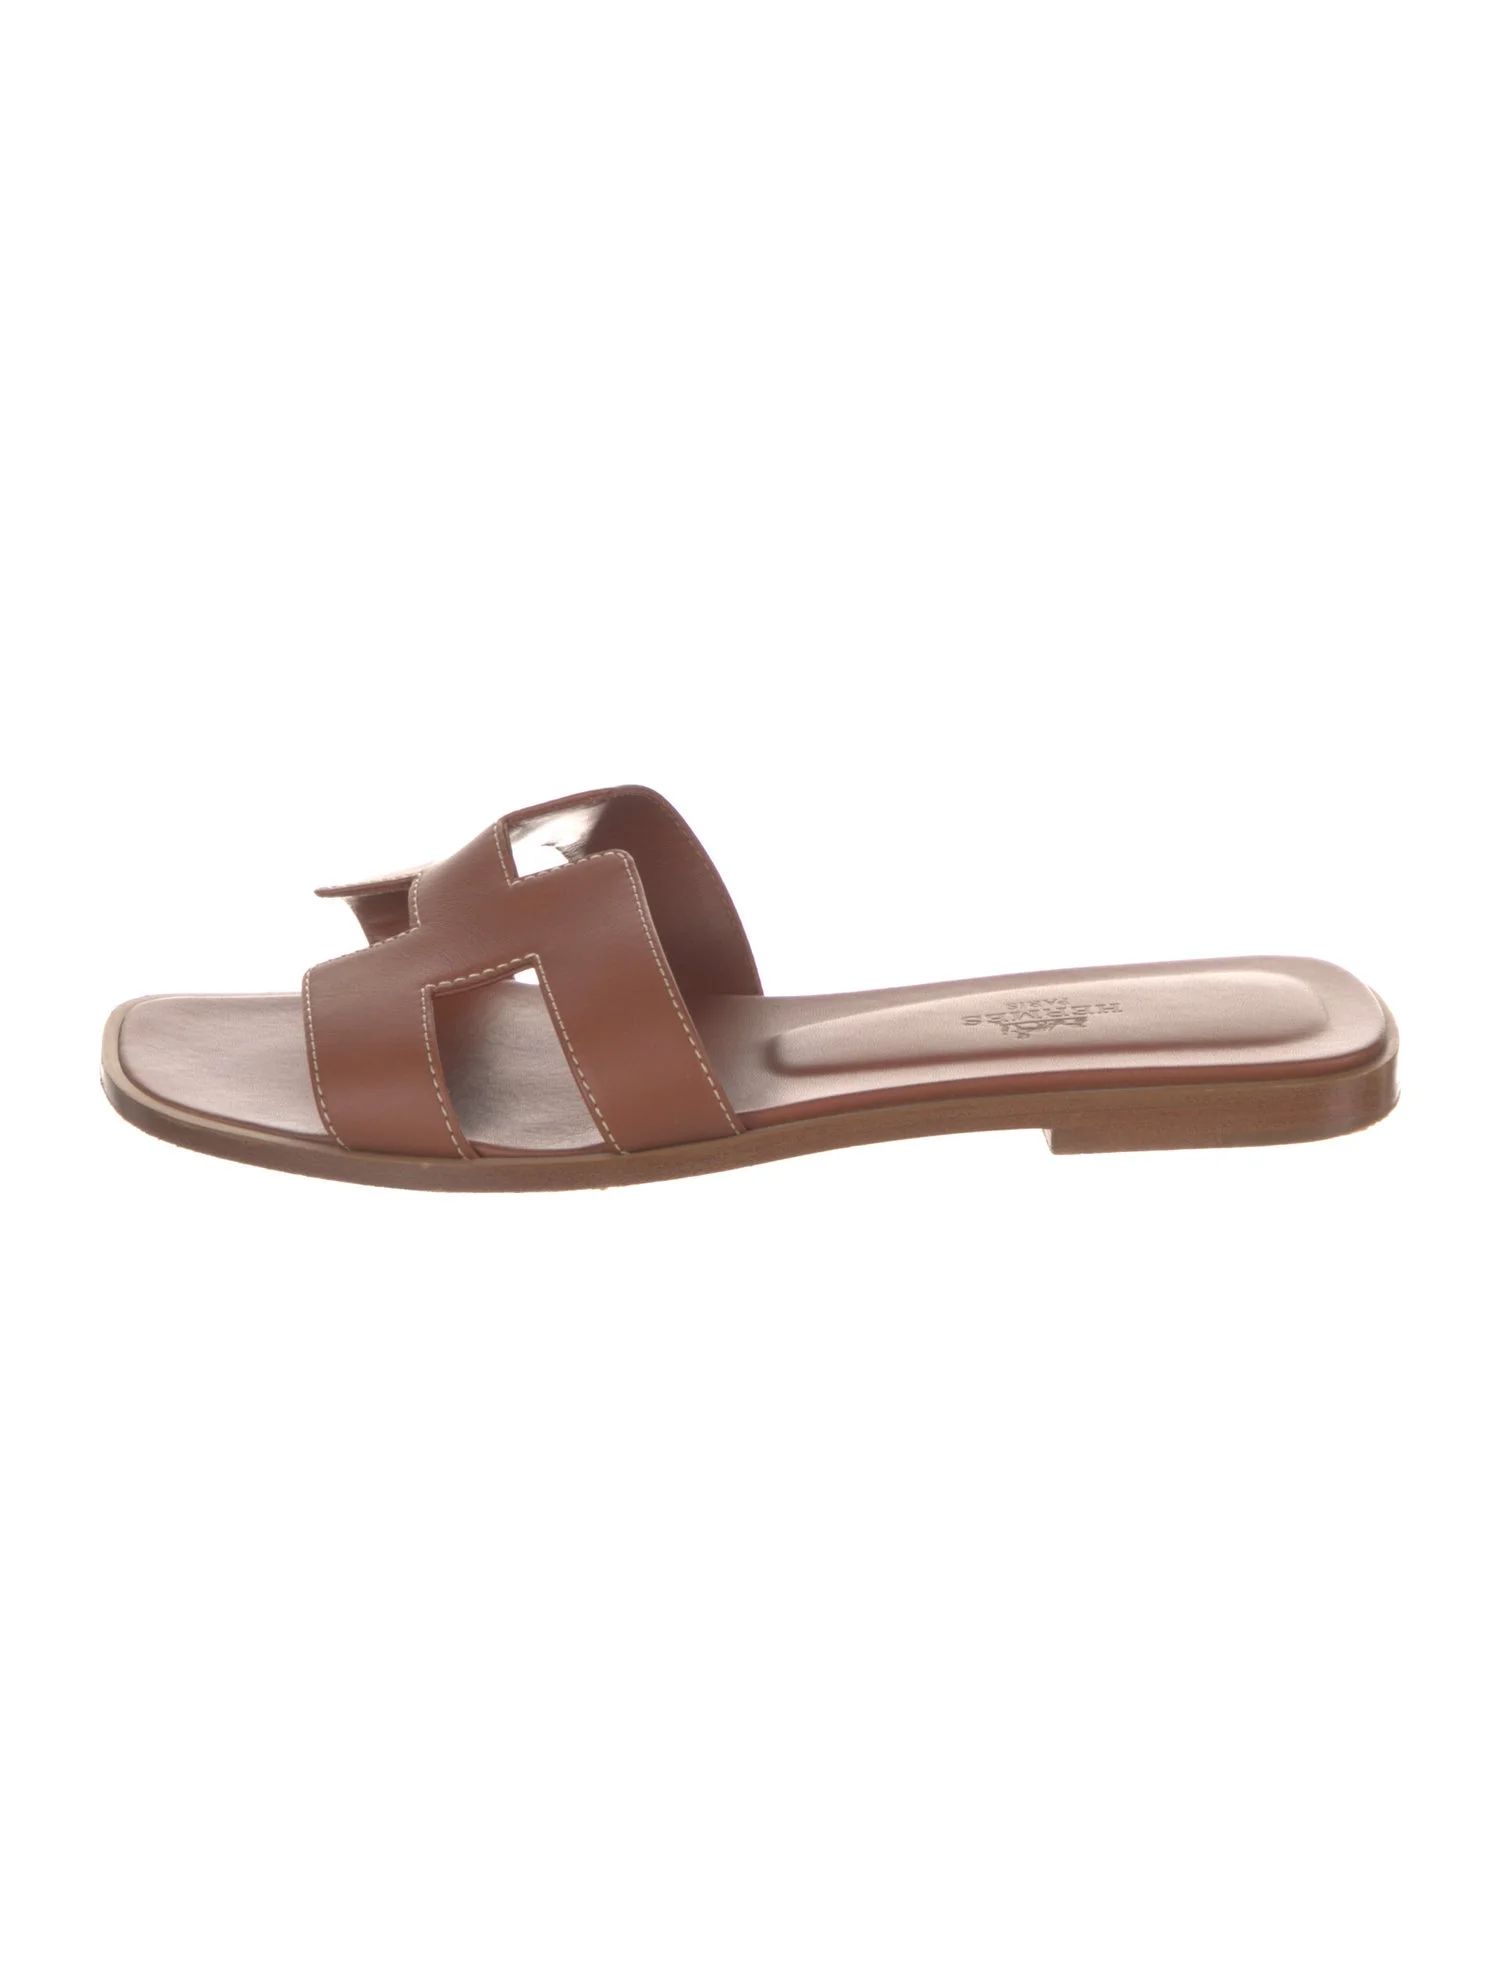 Oran Leather Leather Slides | The RealReal